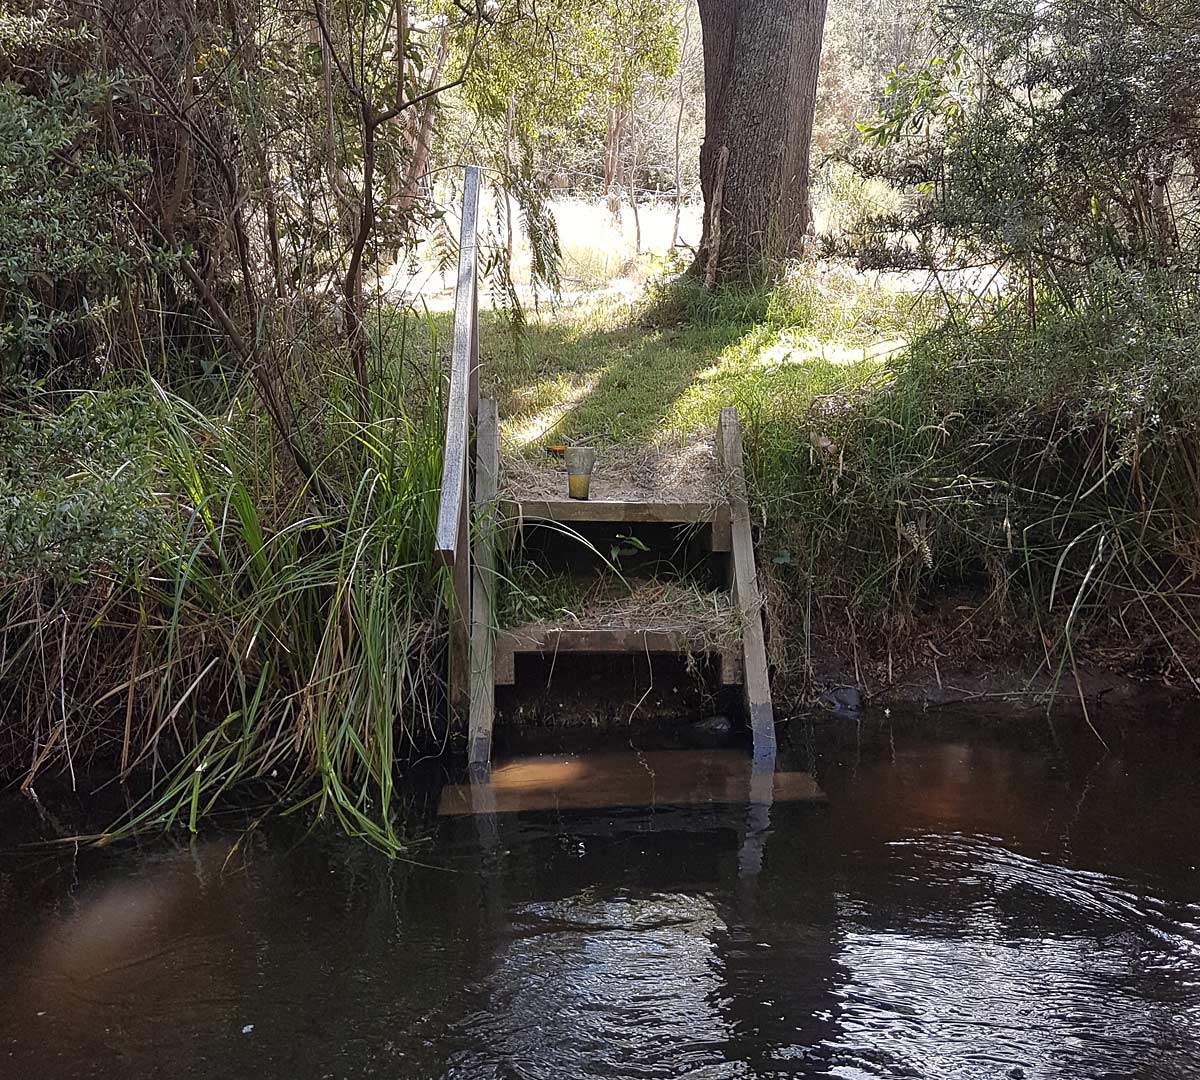 The steps down to the swimming hole.